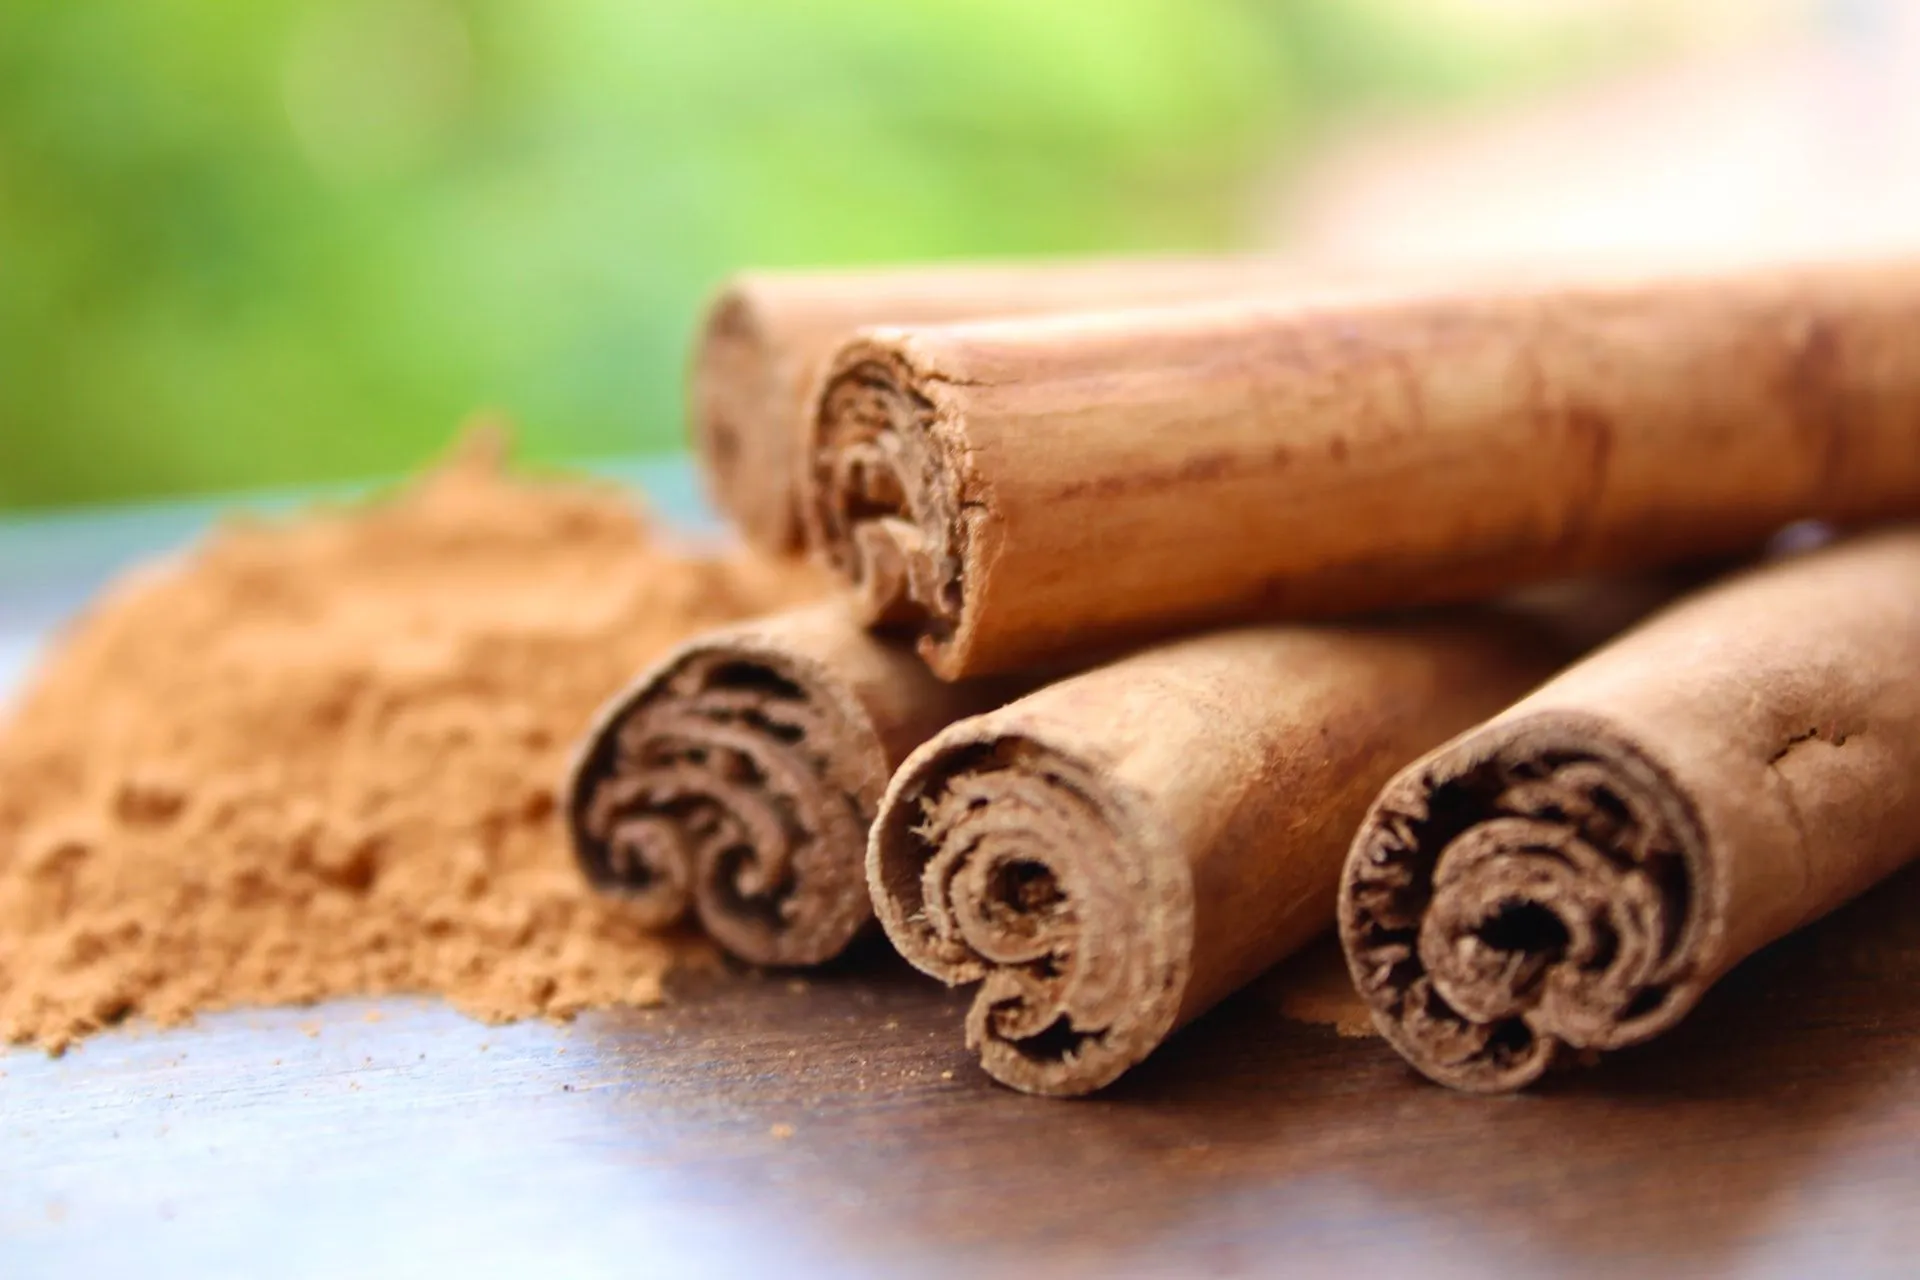 Cinnamon has been historically utilized for its amazing health benefits.